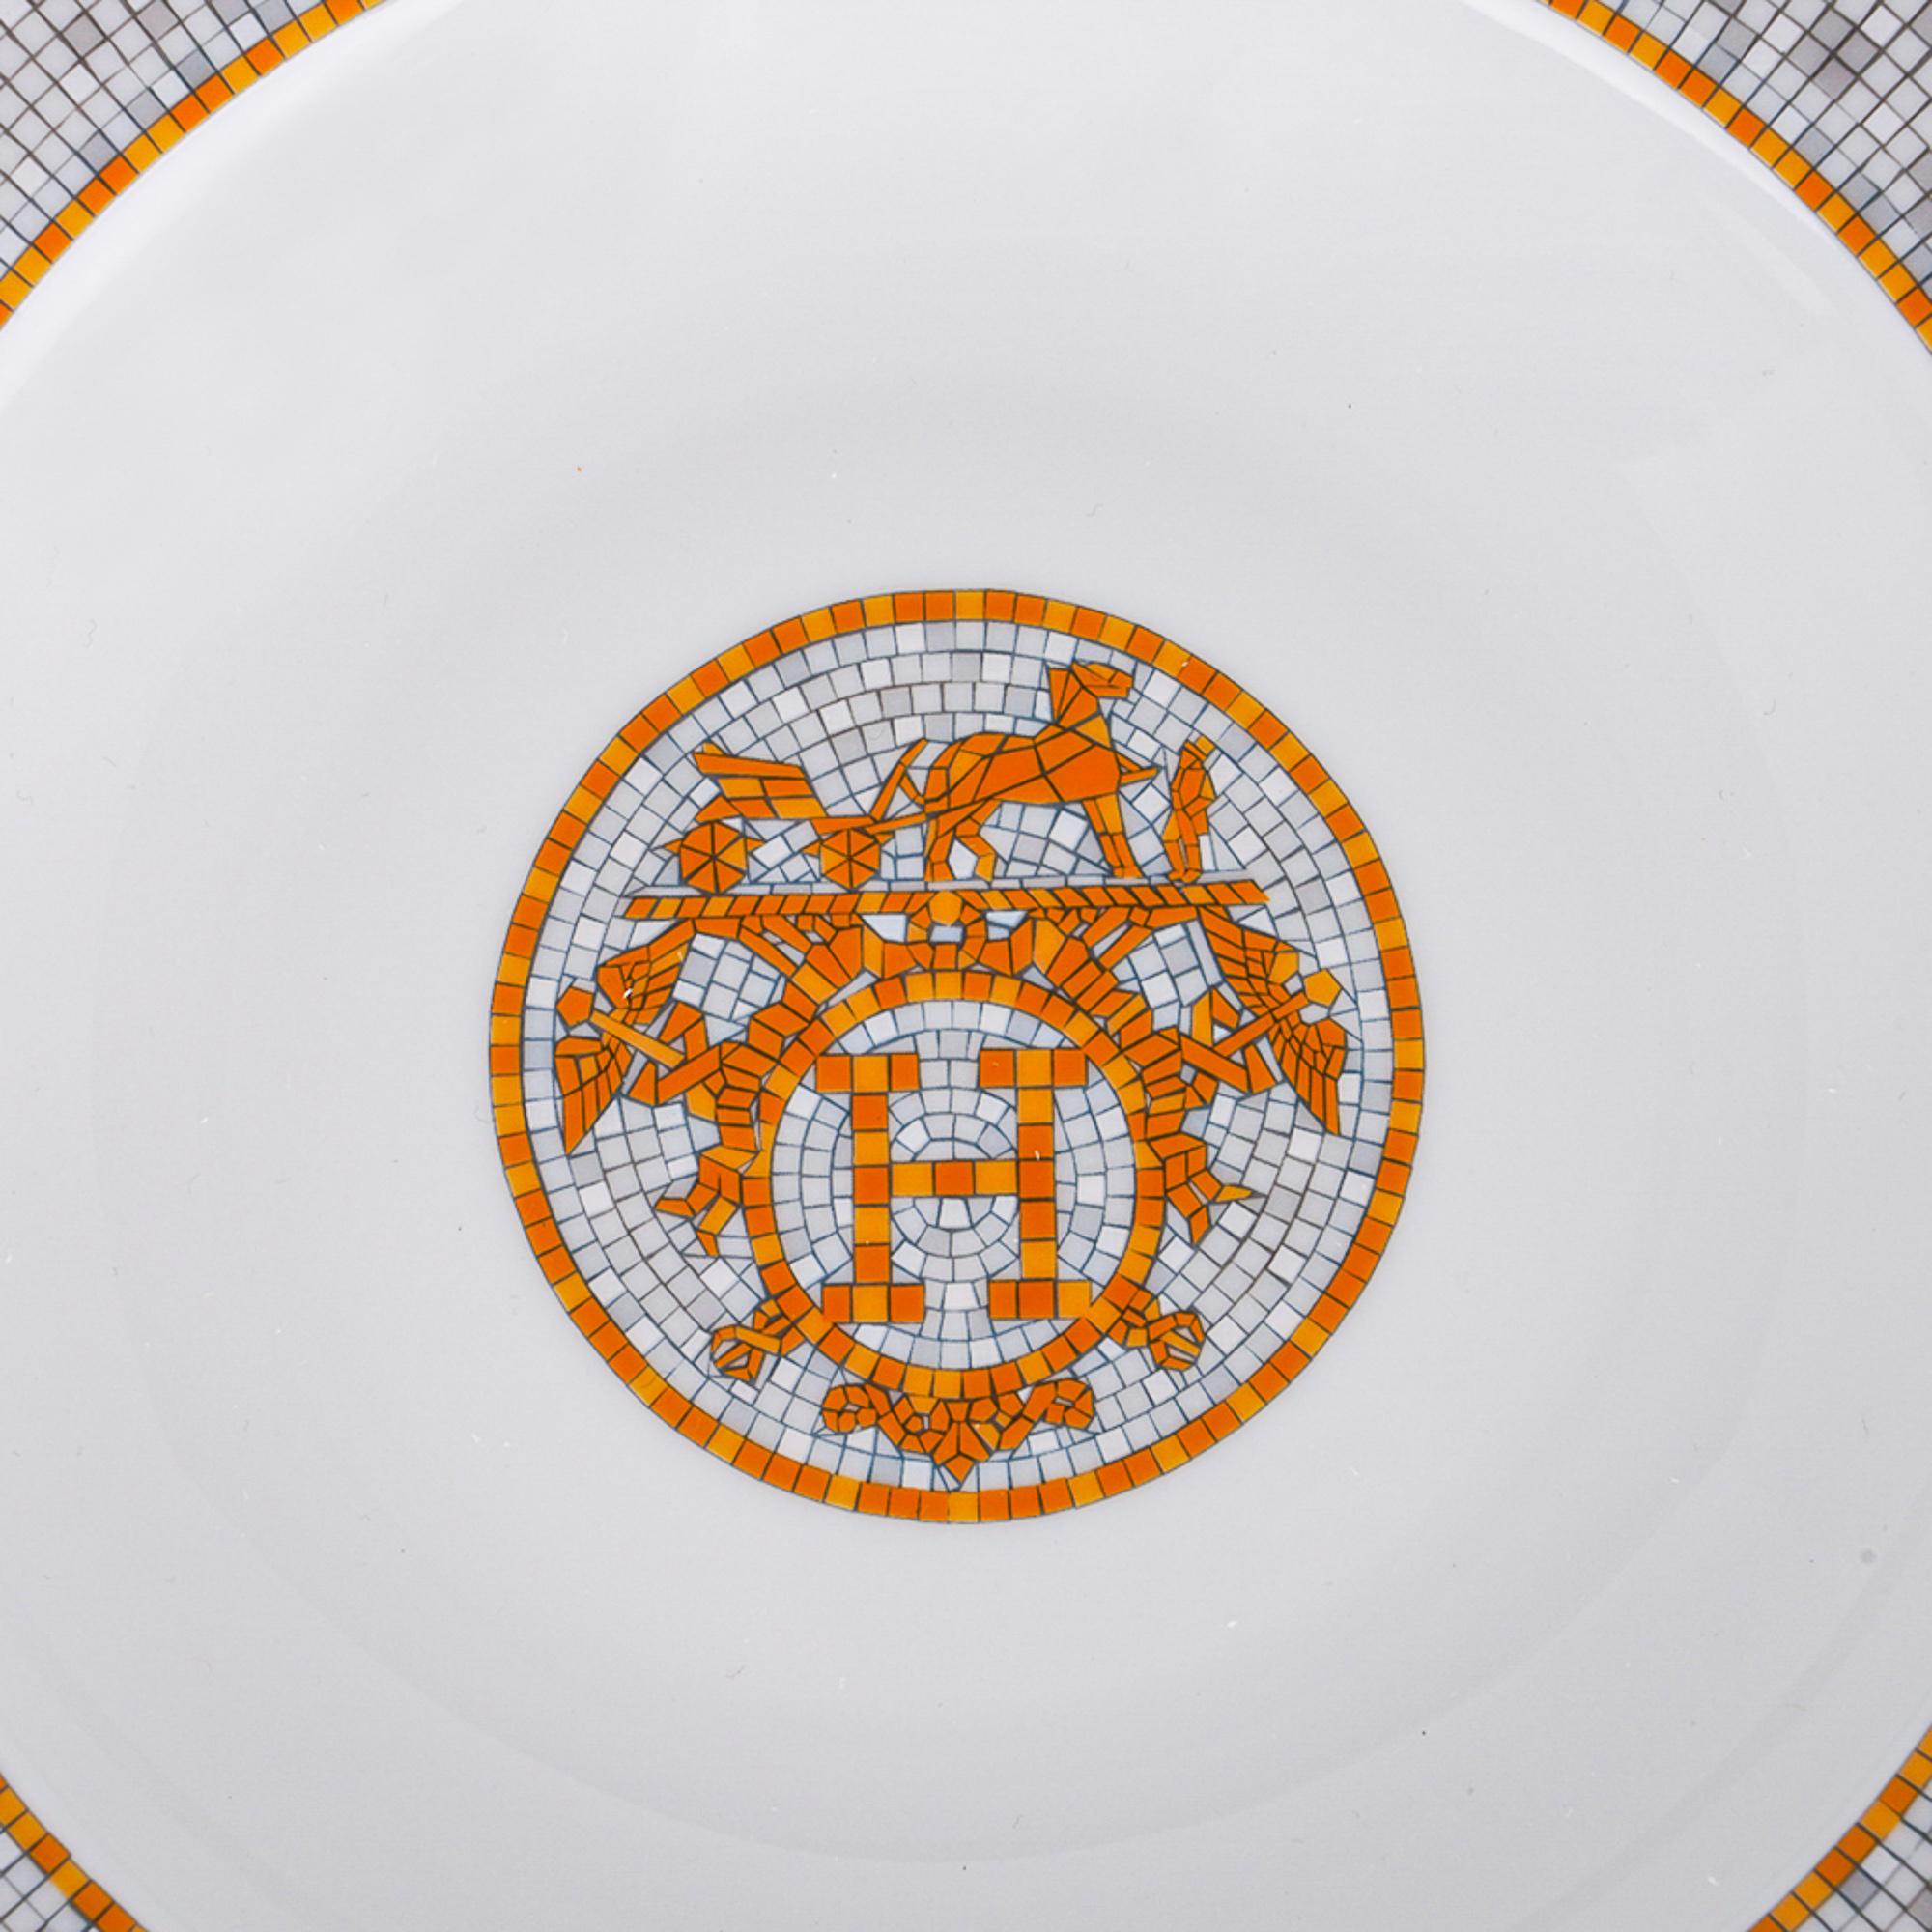 Mightychic offers an Hermes Mosaique Au 24 Soup Plate Set of 2 featured in porcelain and Gold.
The mosaic motif reflects the mosaic floor at the entrance of the 24 Faubourg St. Honore flagship store in Paris.
For an elegant table.
Wonderful for home